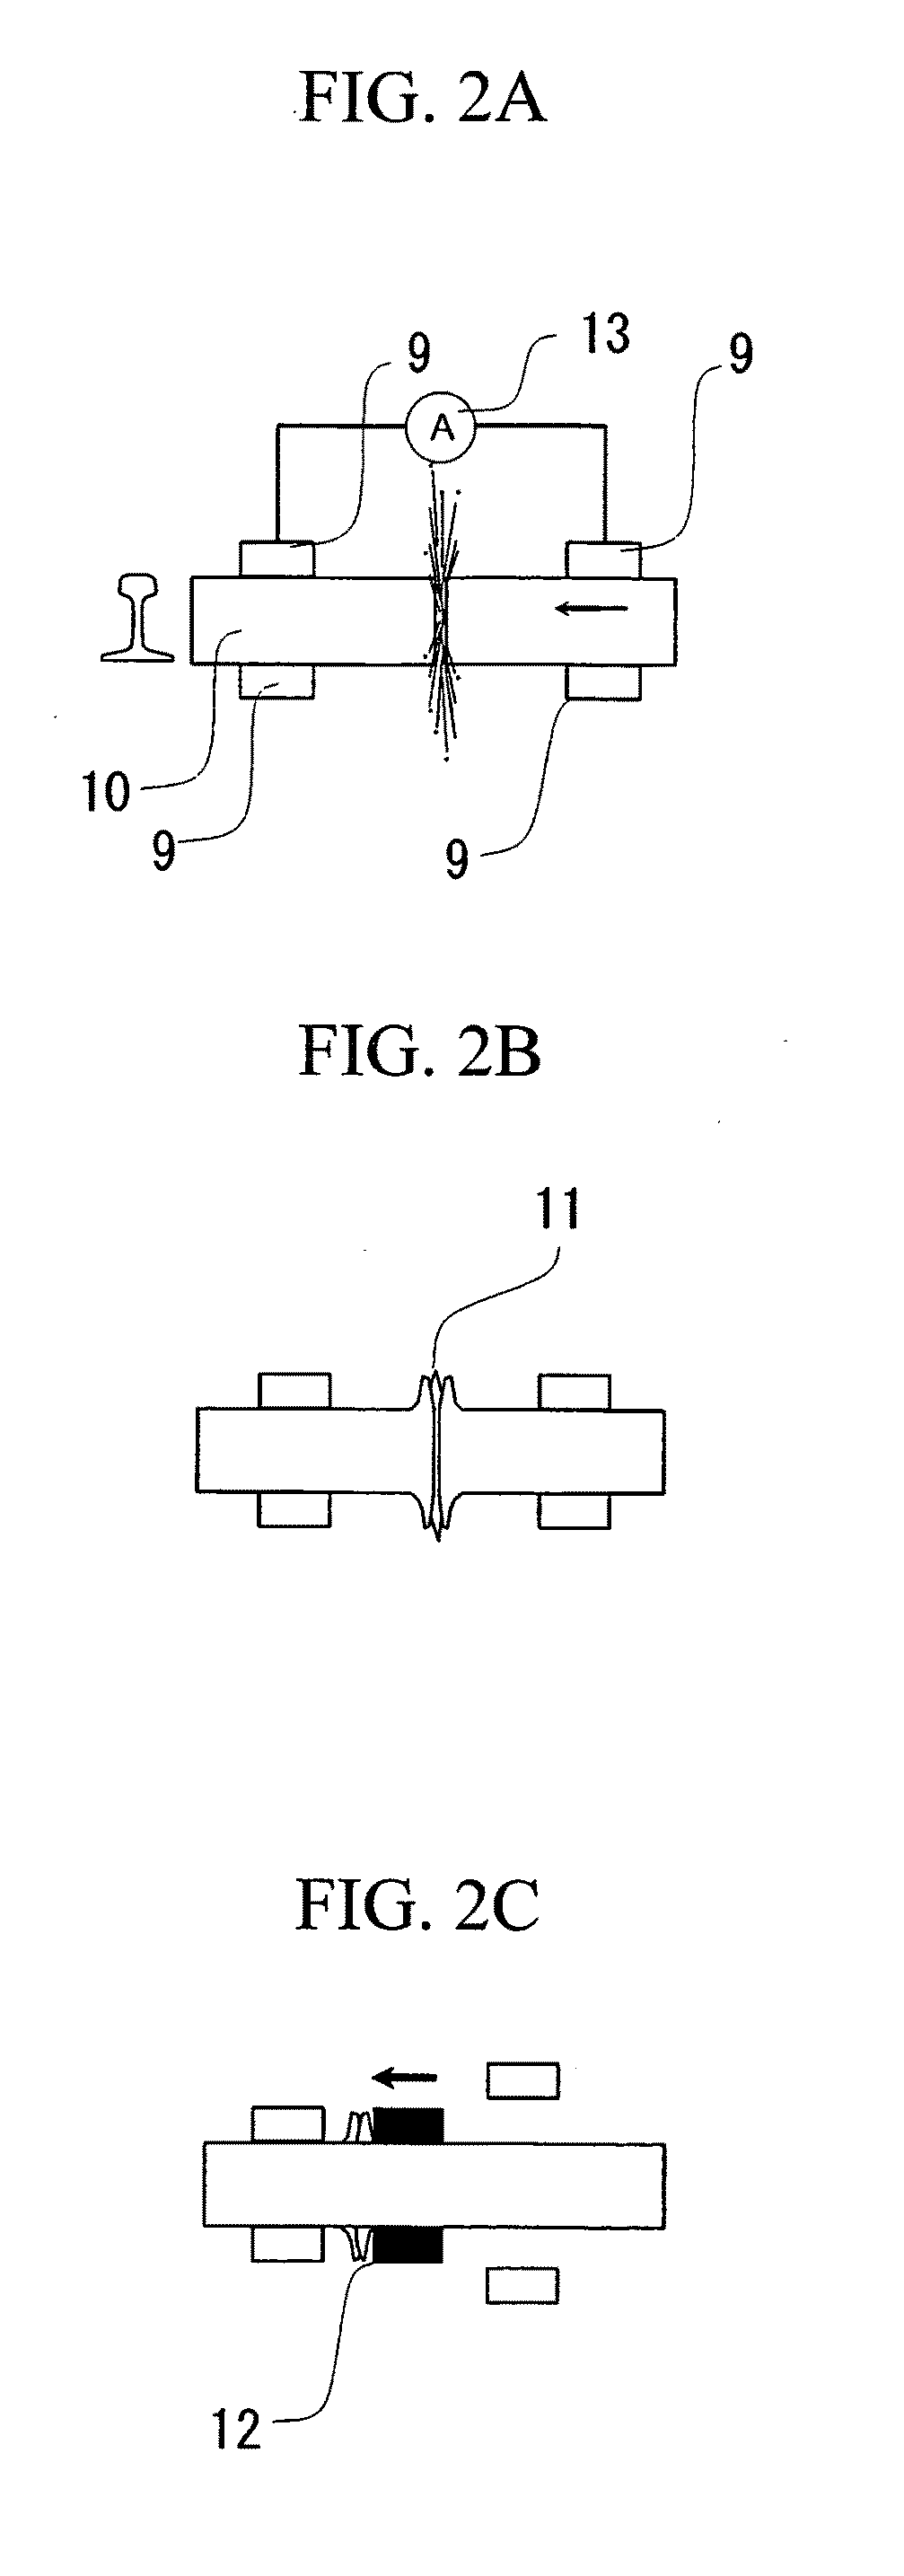 Method of cooling rail weld zone, device for cooling rail weld zone, and rail weld joint